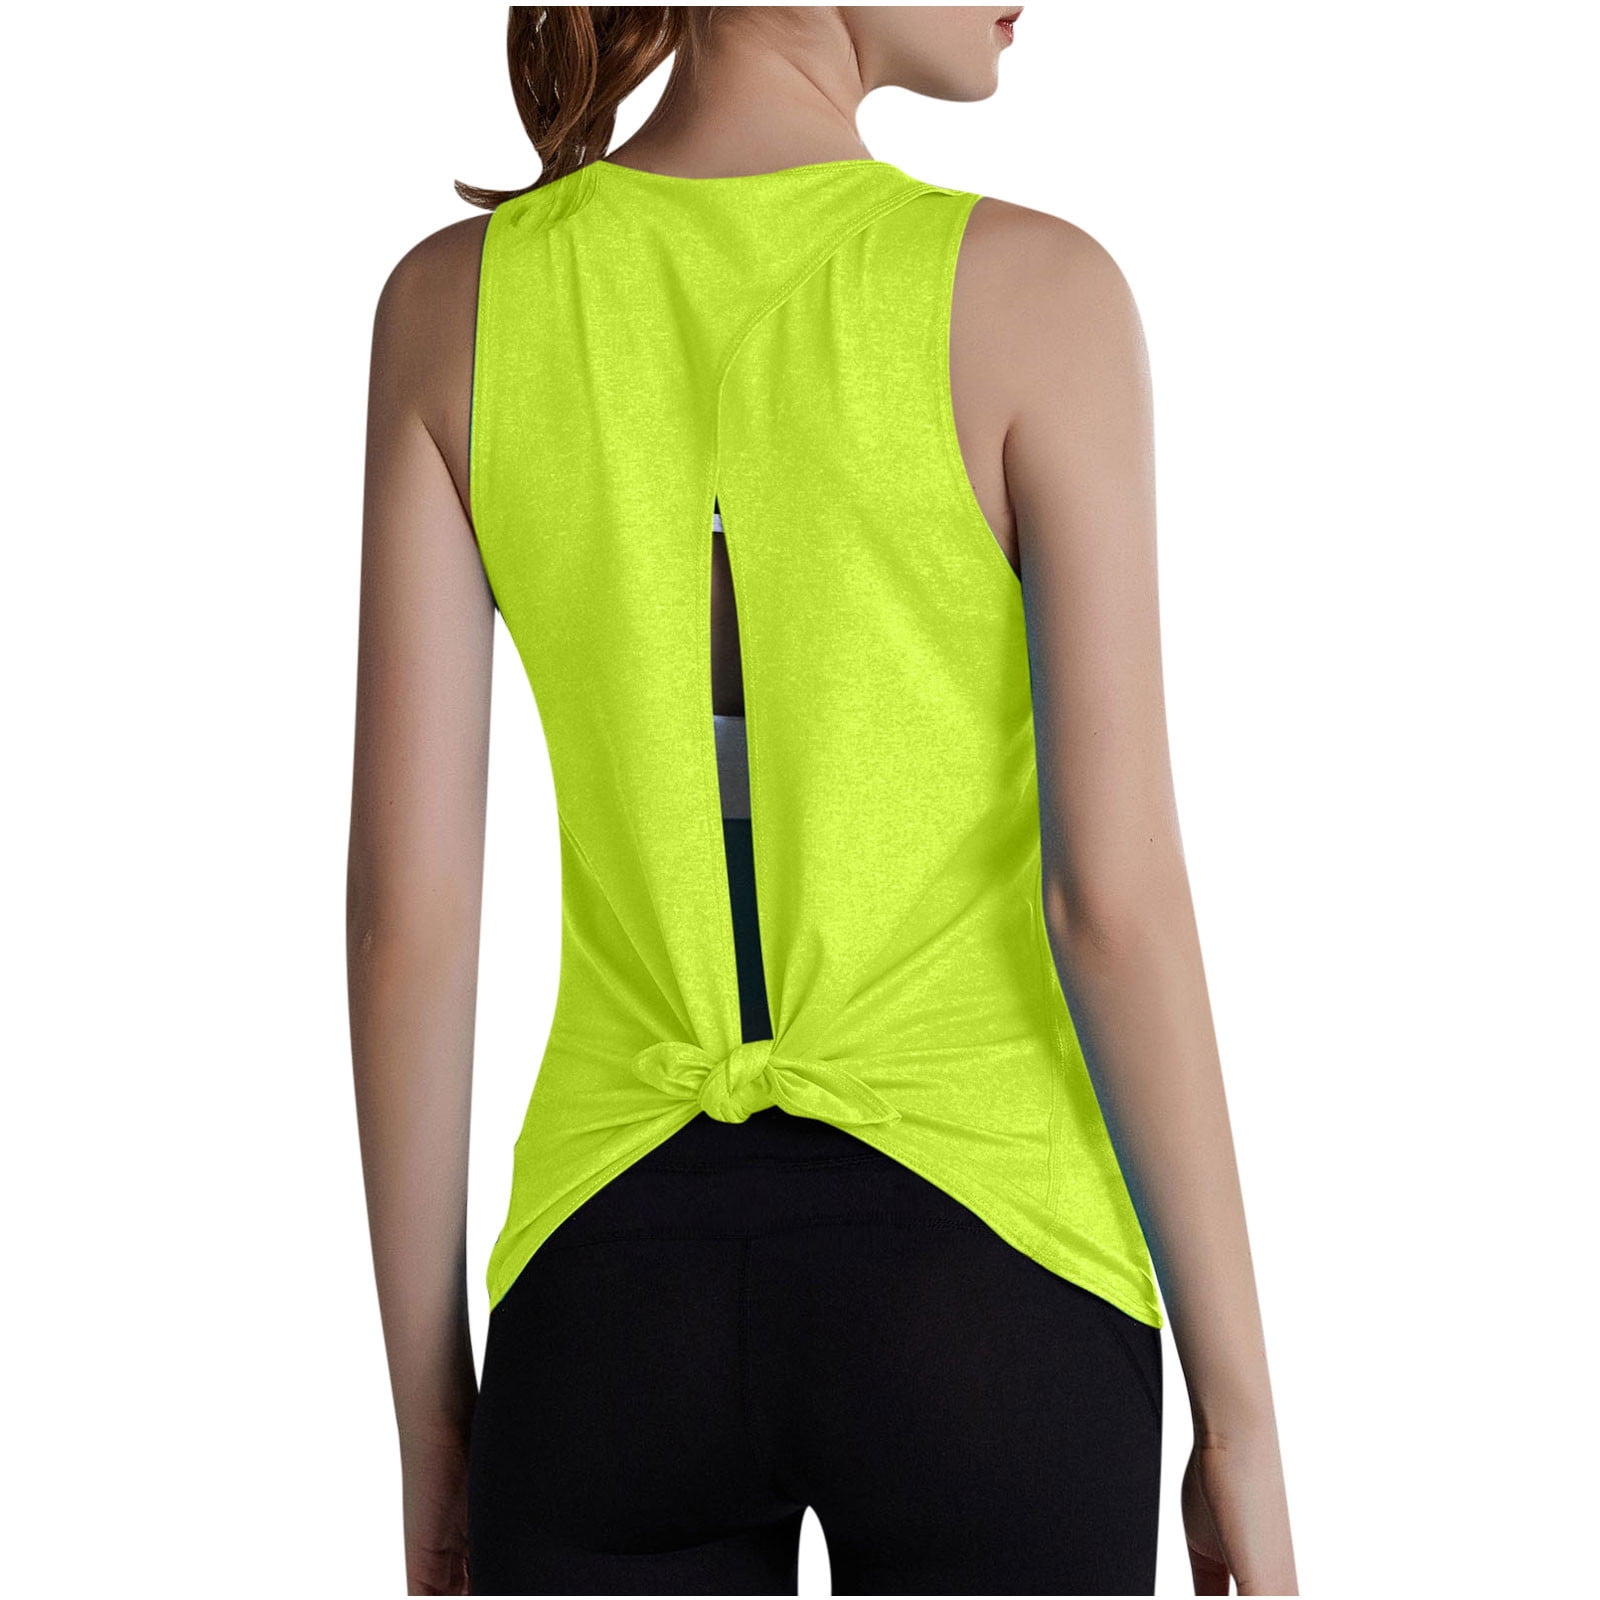 Workout Tank Tops for Women Loose Fit Yoga Tops for Women Running